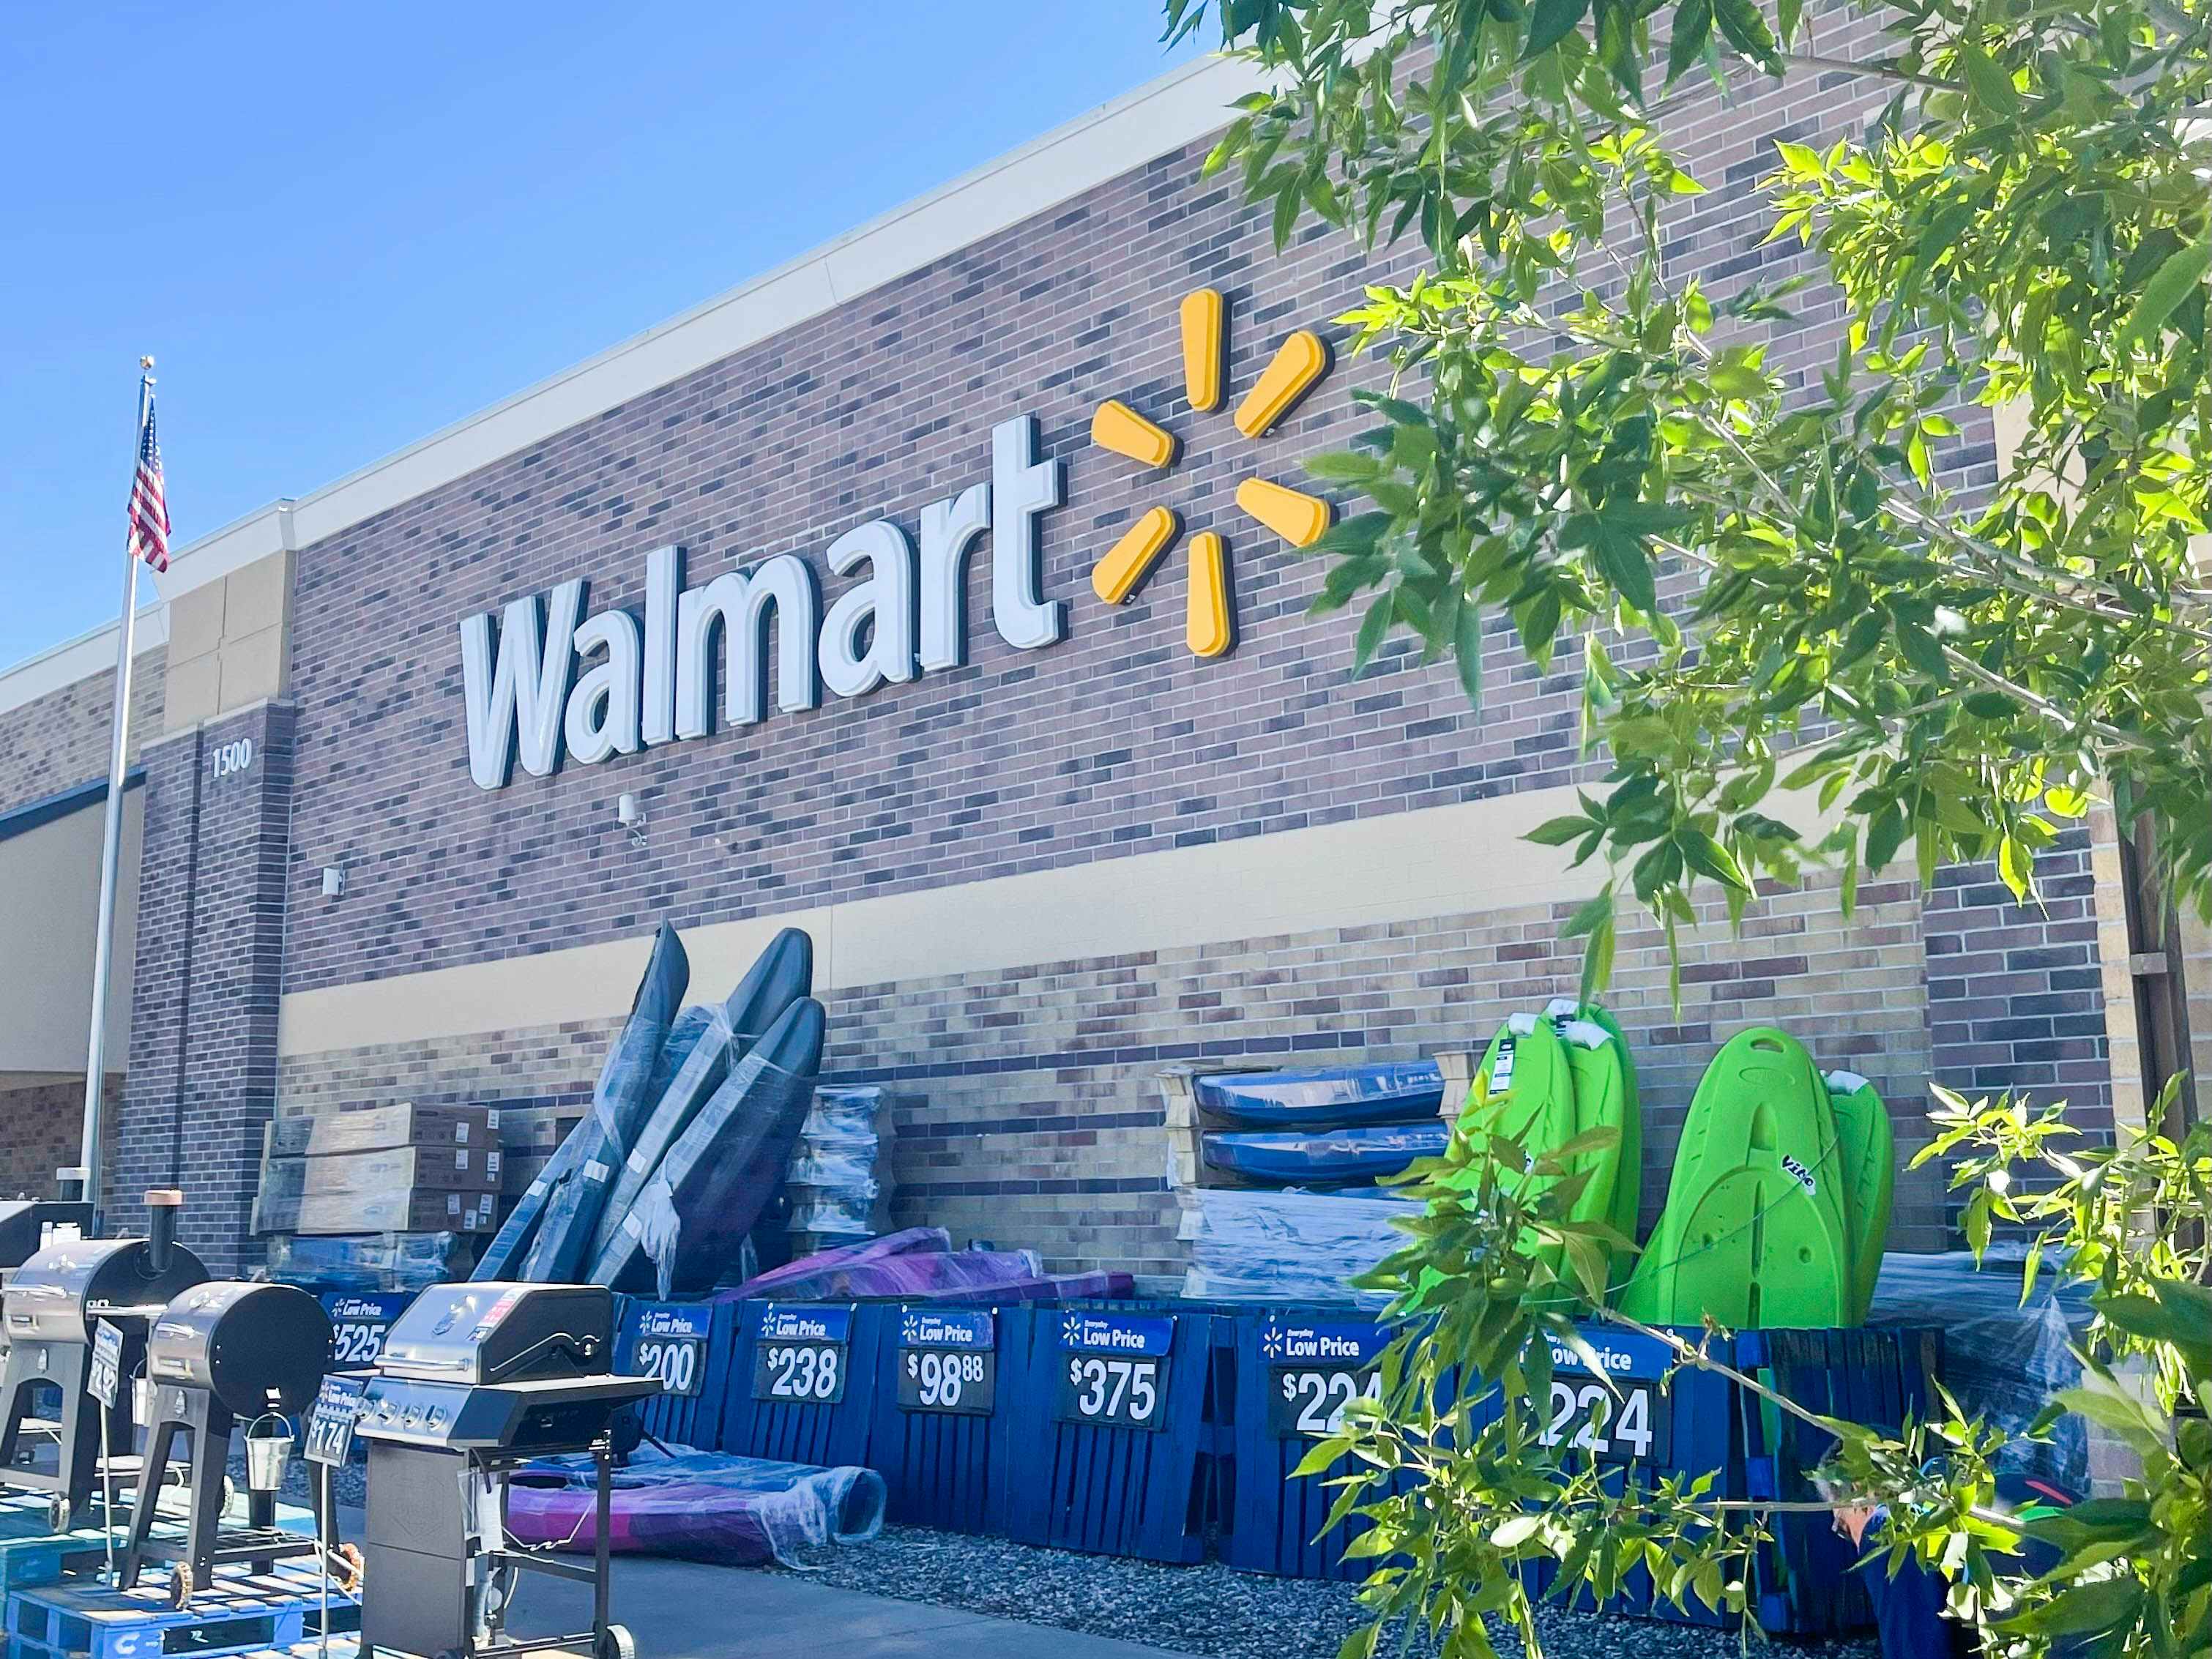 A Walmart storefront during the day with products on display outside.